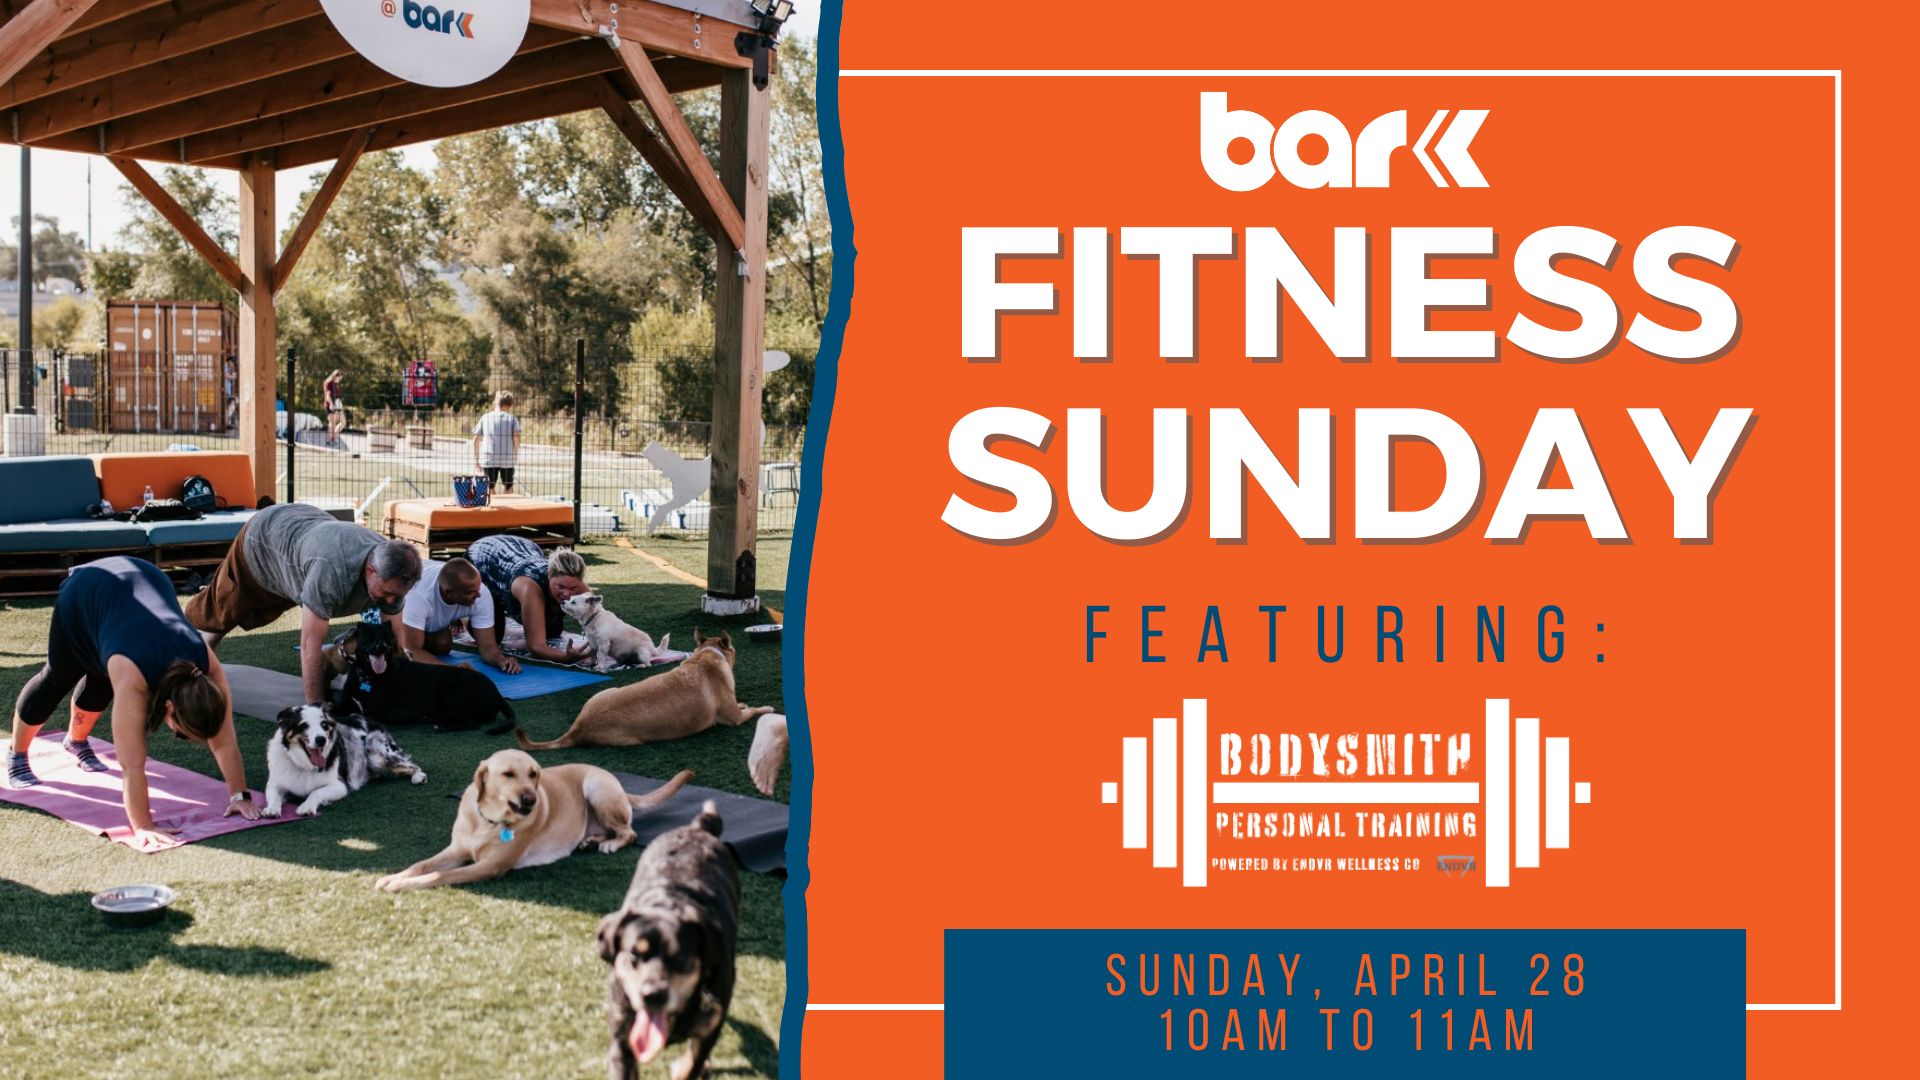 Fitness Sunday Bar K featuring bodysmith personal training sunday April 28 10 am to 11am